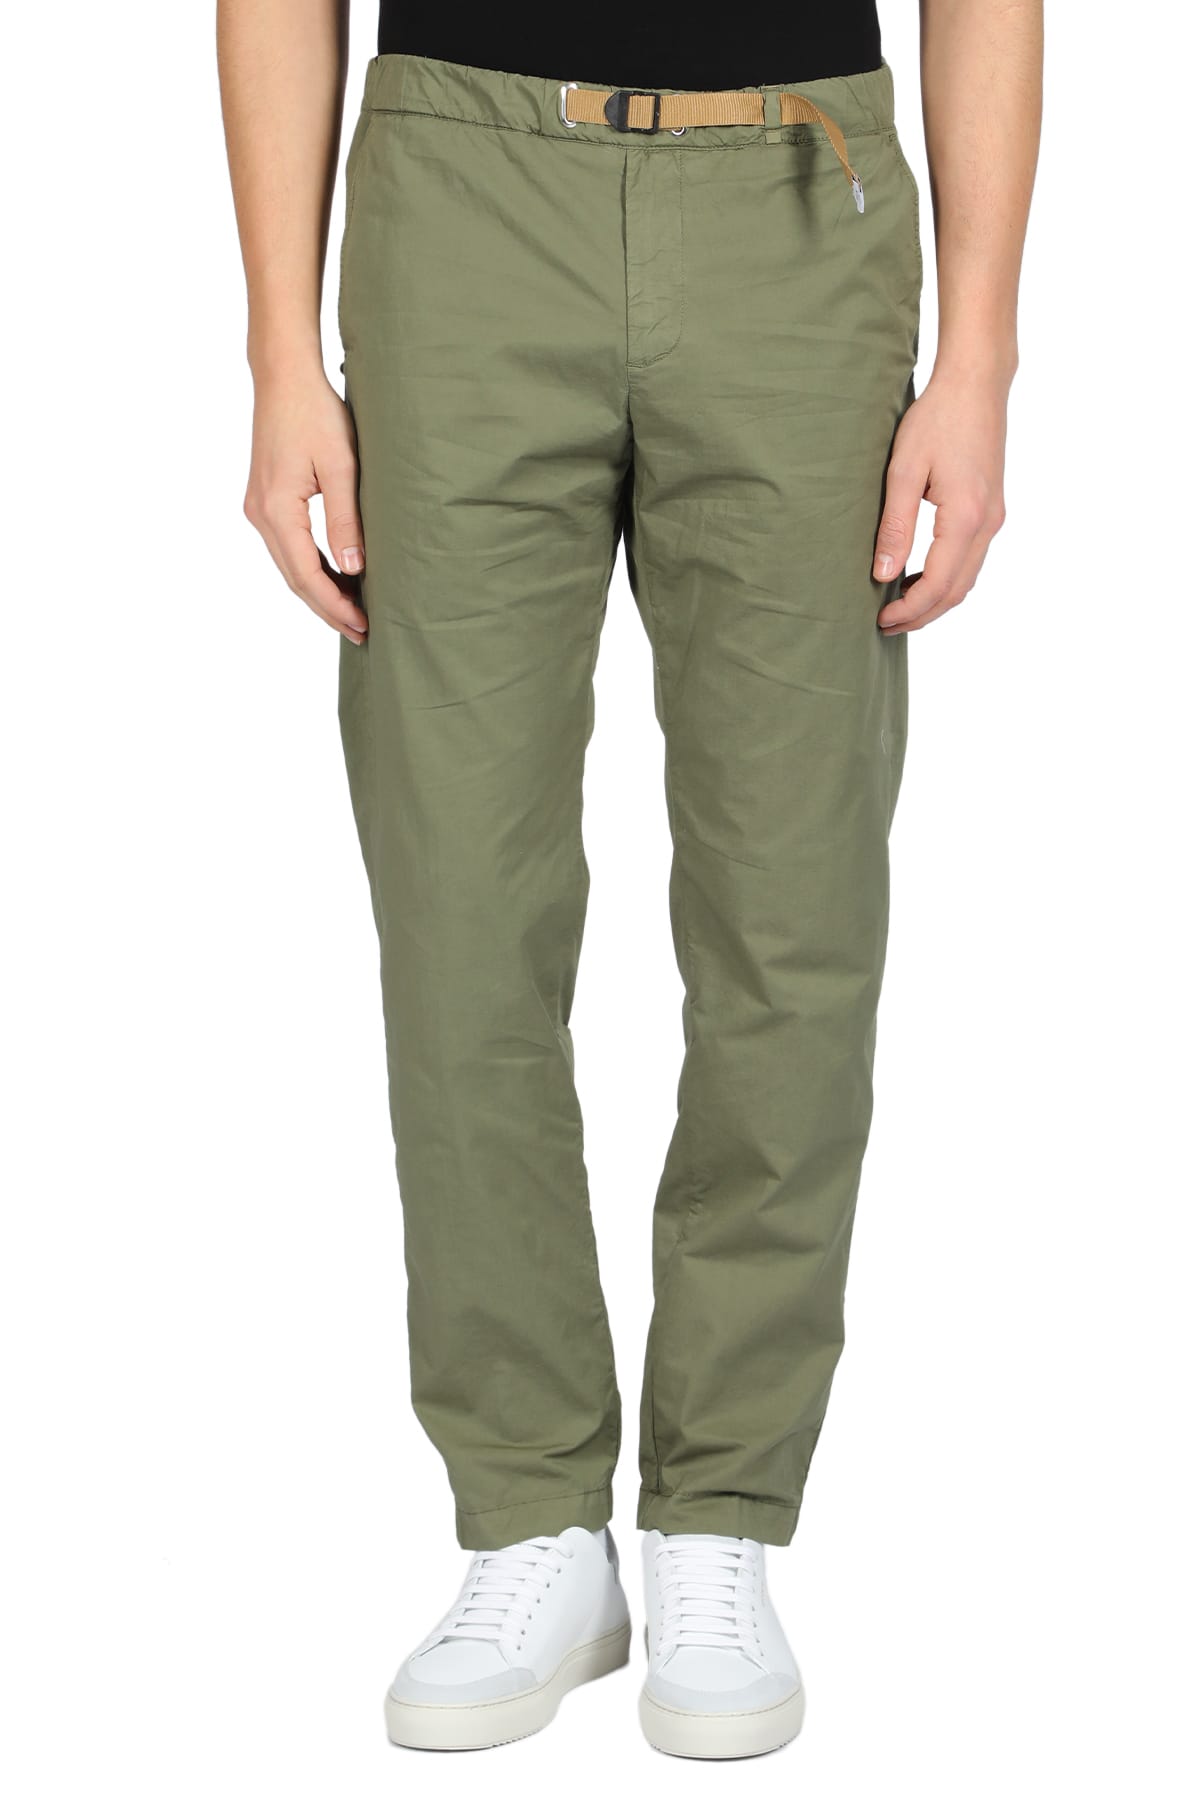 White Sand Cotton Chino With Belt In Salvia